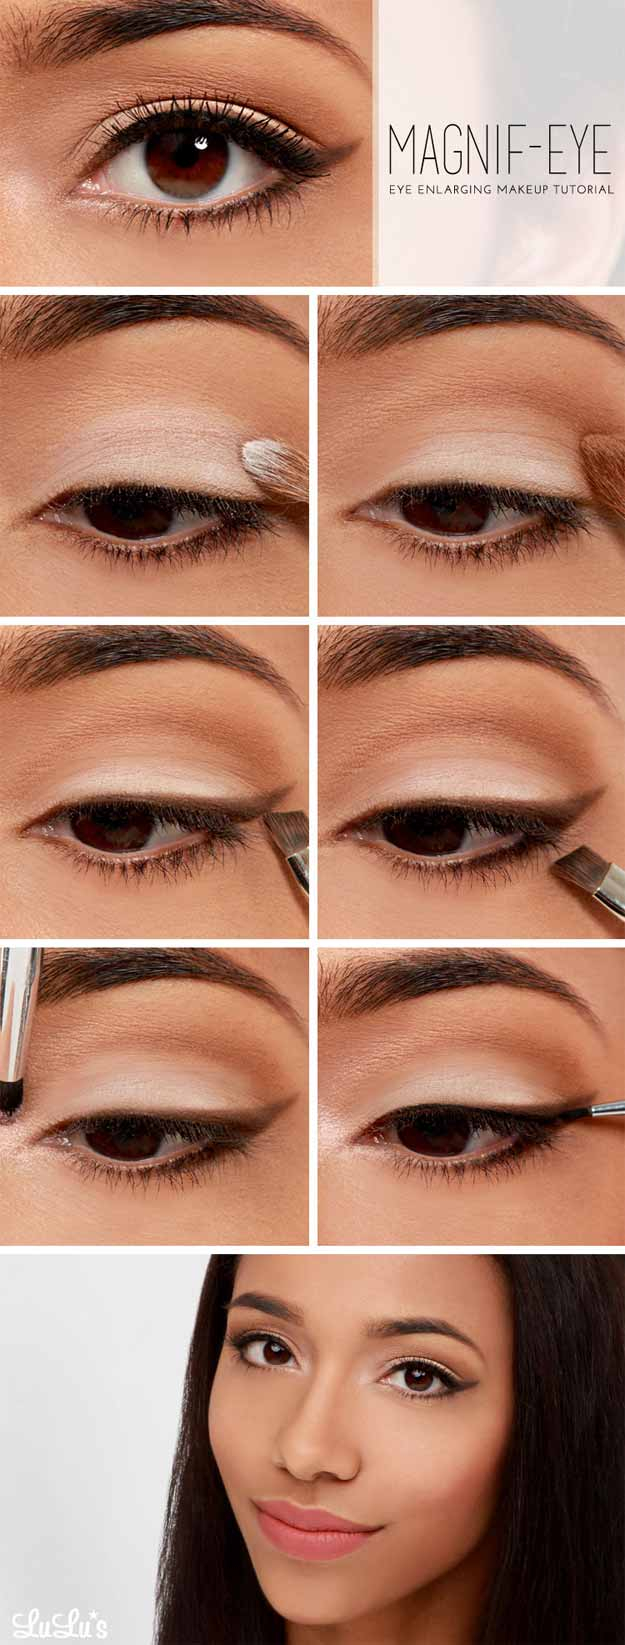 How To Do Makeup For Brown Eyes 30 Wedding Makeup For Brown Eyes The Goddess